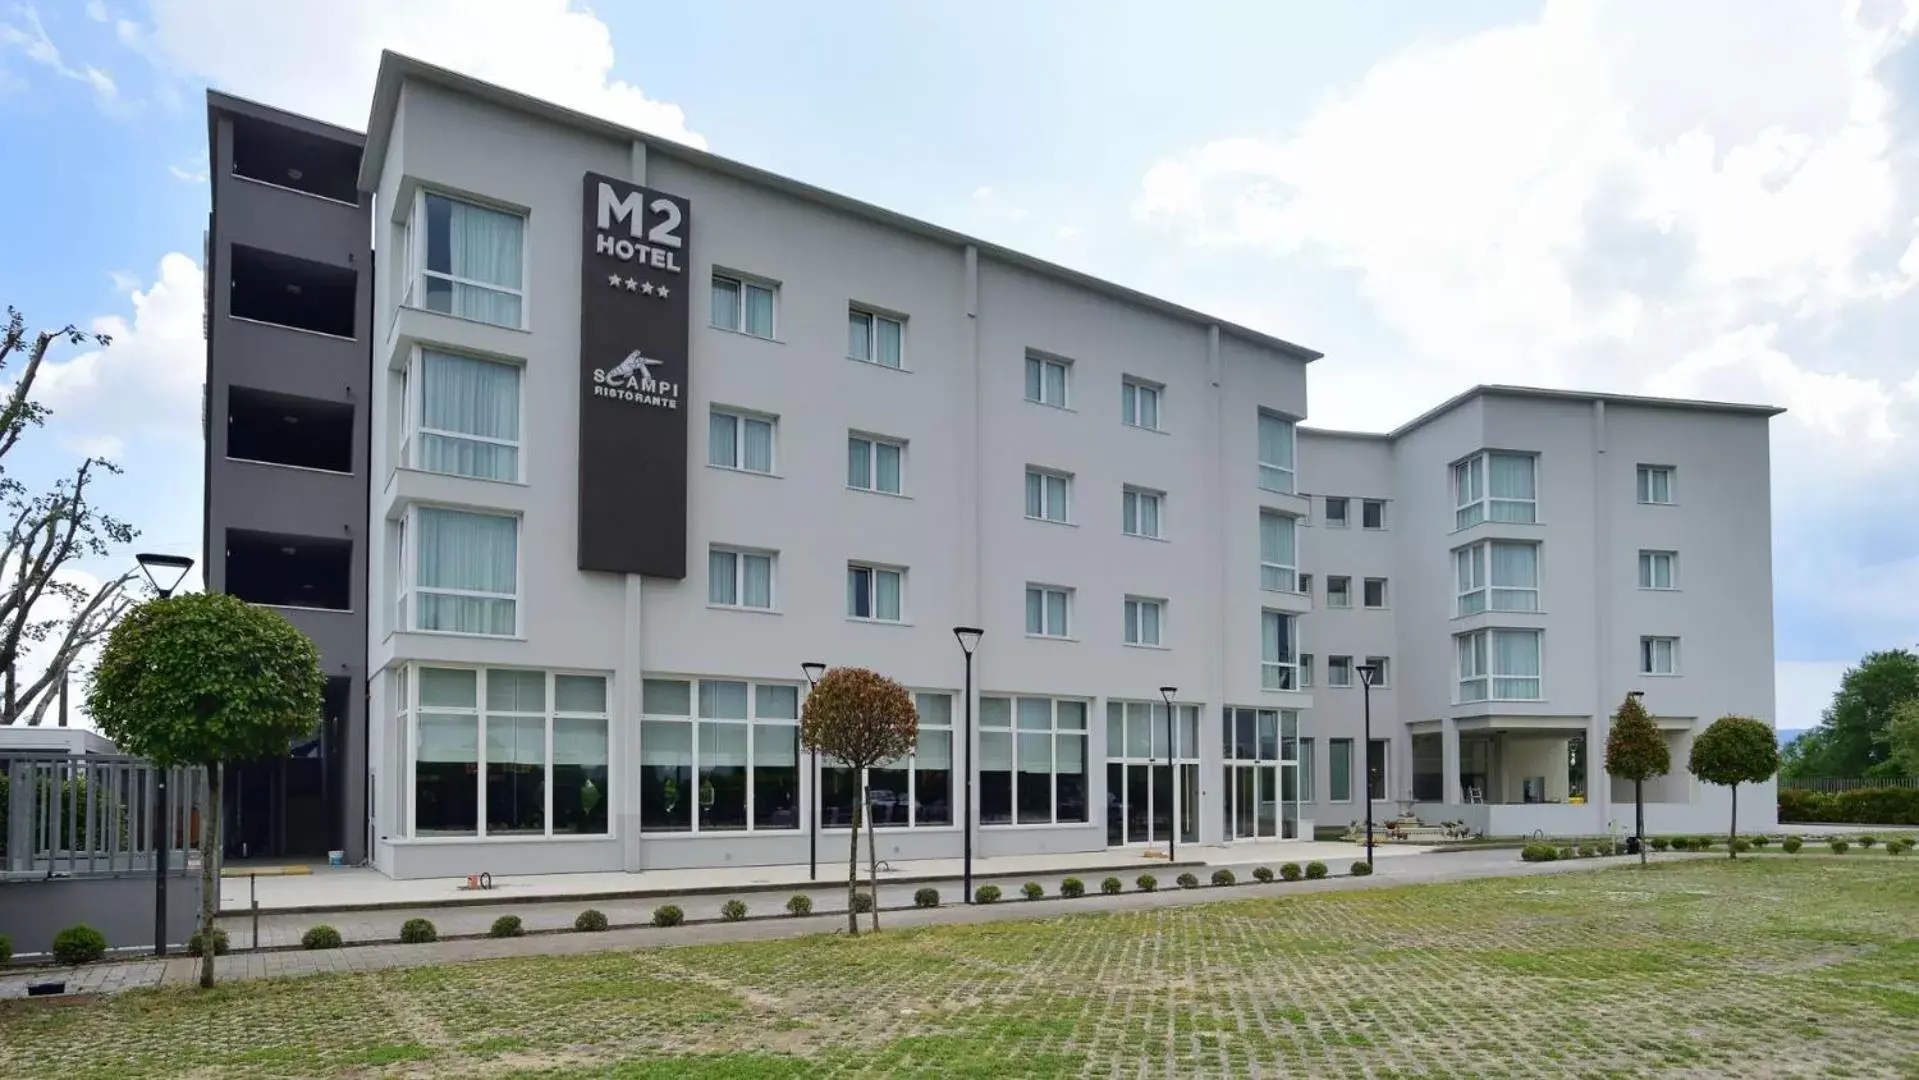 Property Building in M2 Hotel